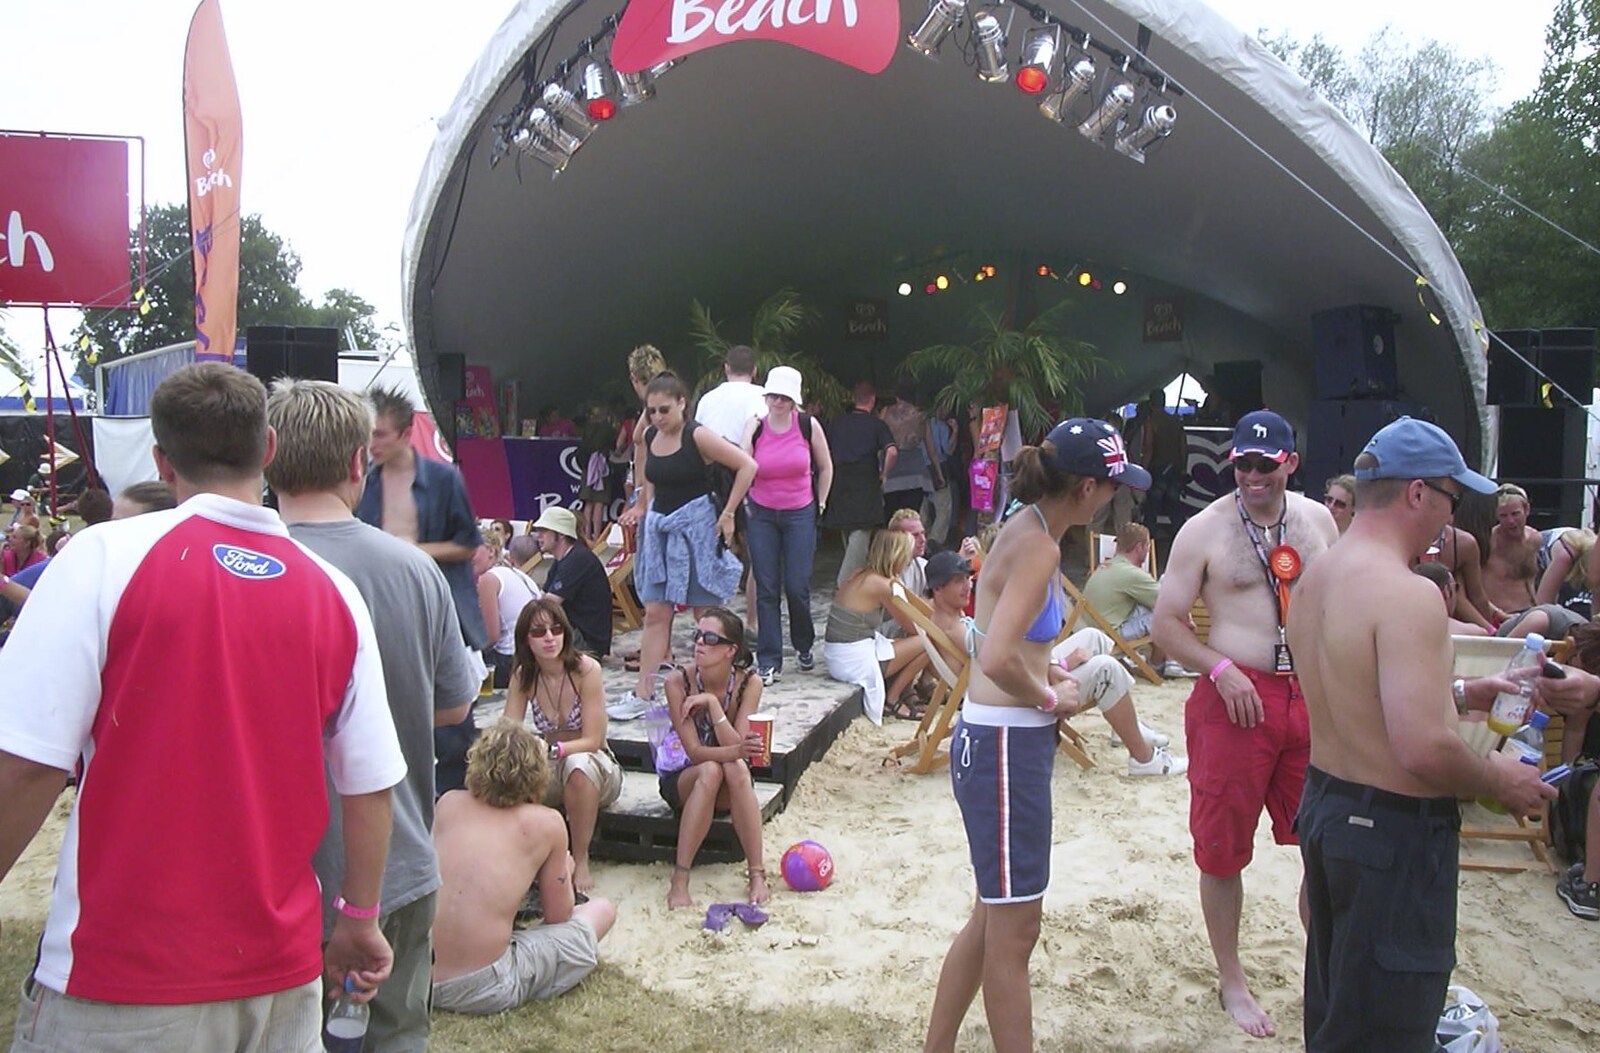 There's a fake beach from V Festival 2003, Hyland's Park, Chelmsford, Essex - 16th August 2003